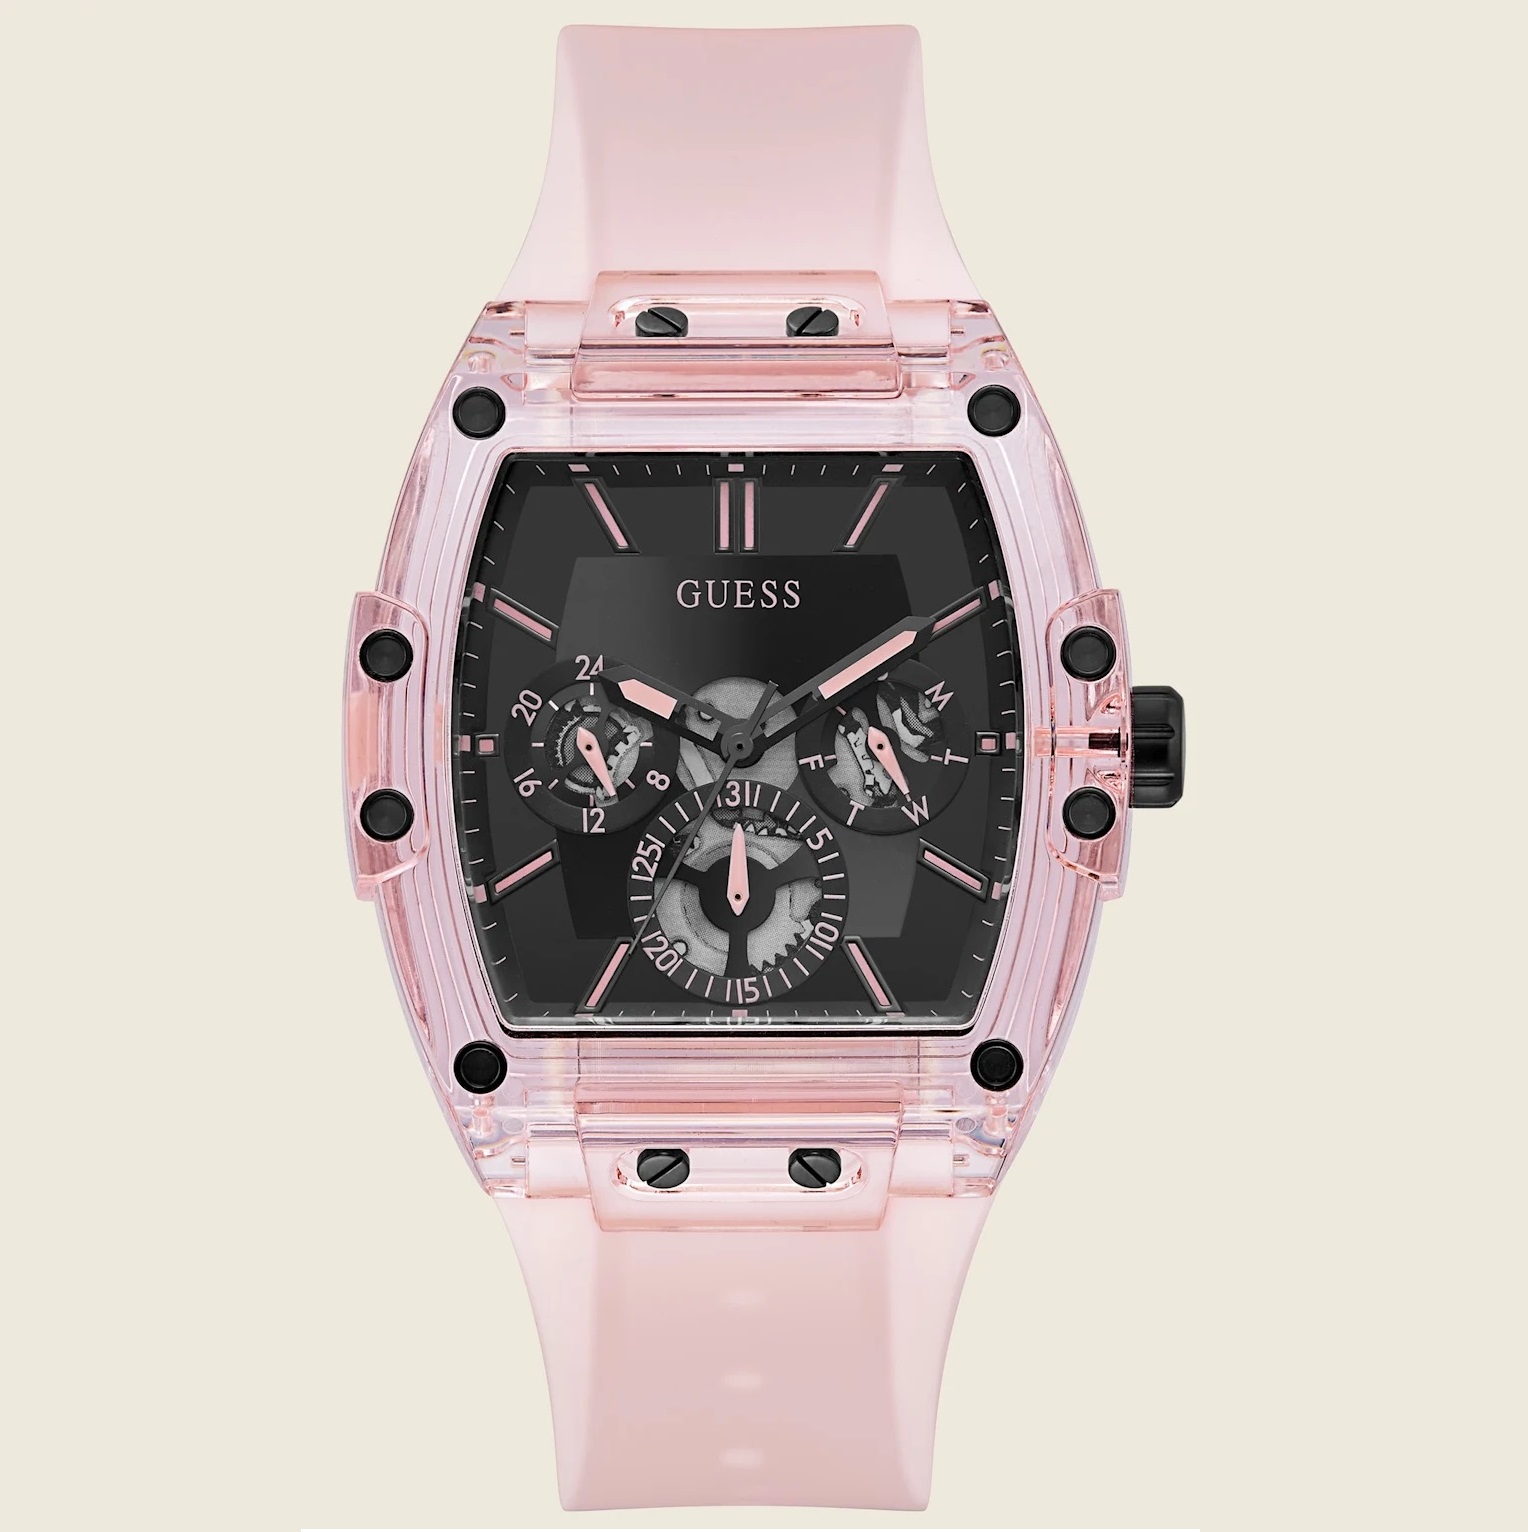 ĐỒNG HỒ GUESS PINK MULTIFUNCTION WATCH GW0203G11 4